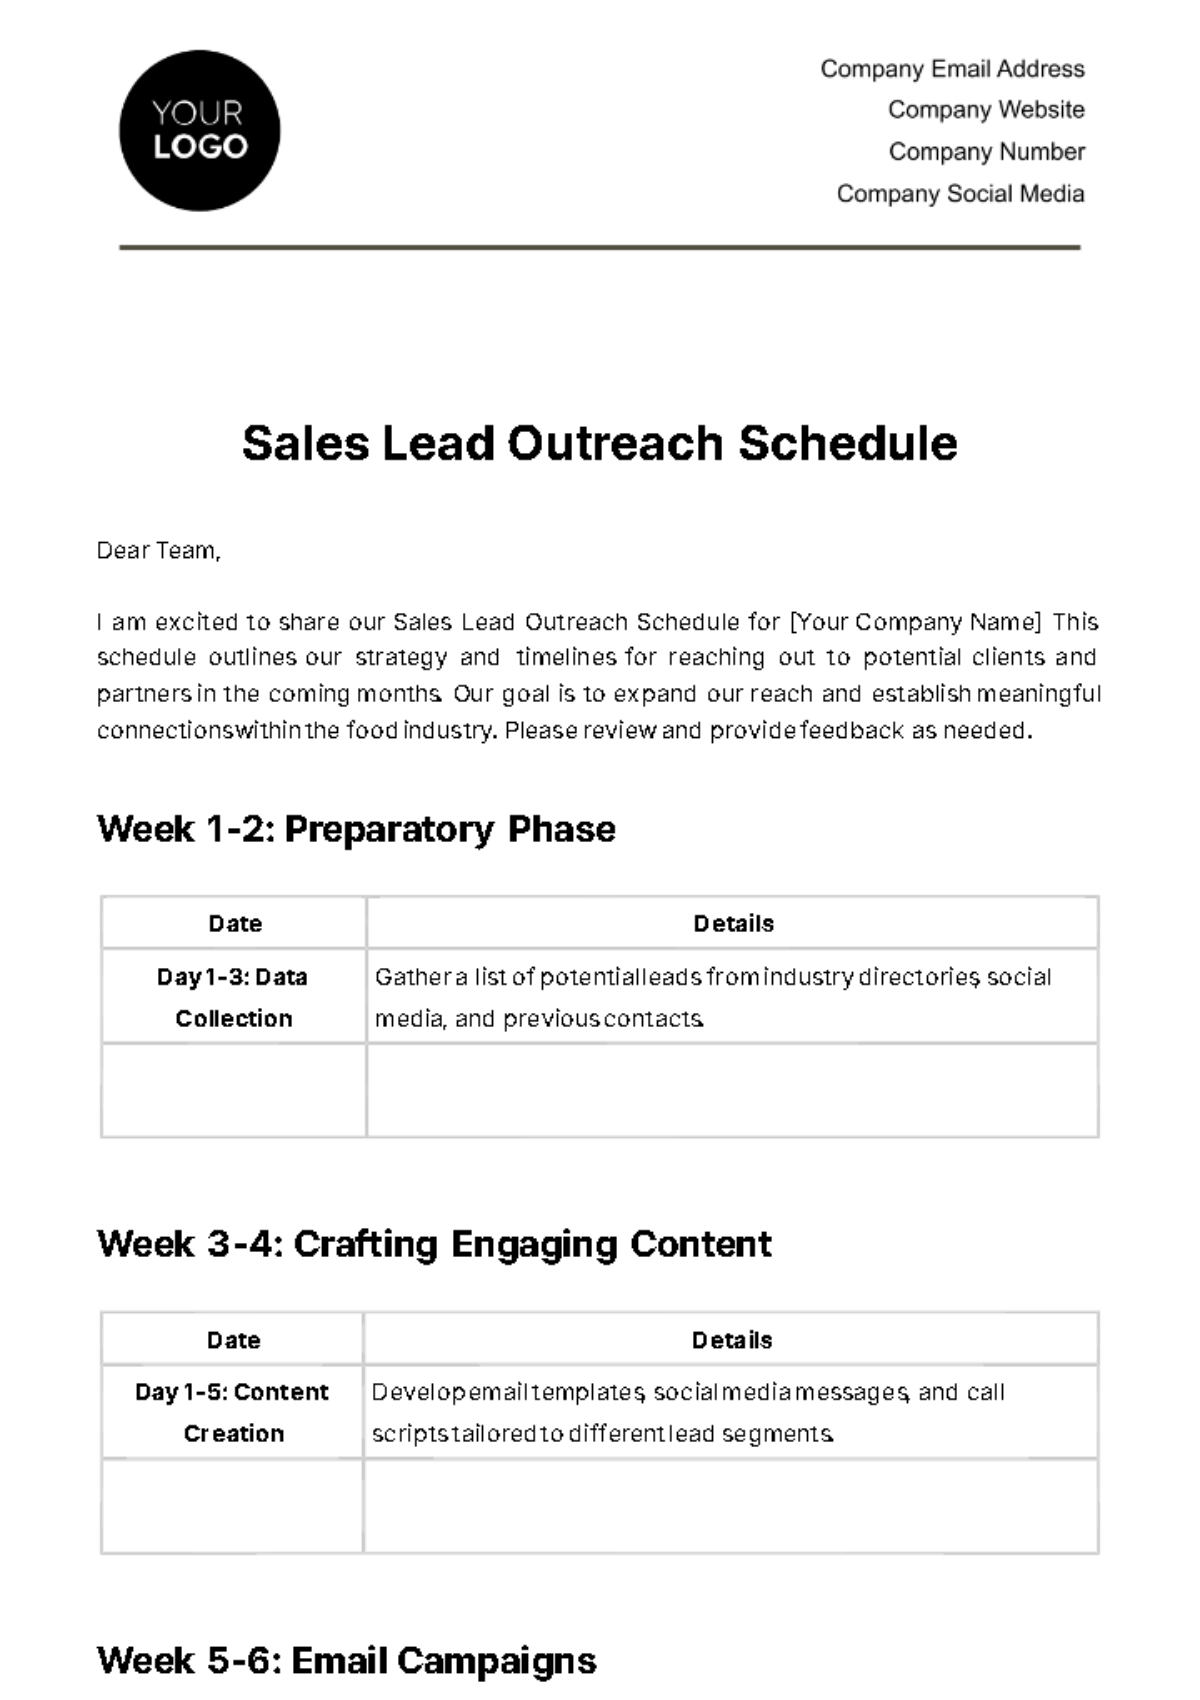 Sales Lead Outreach Schedule Template